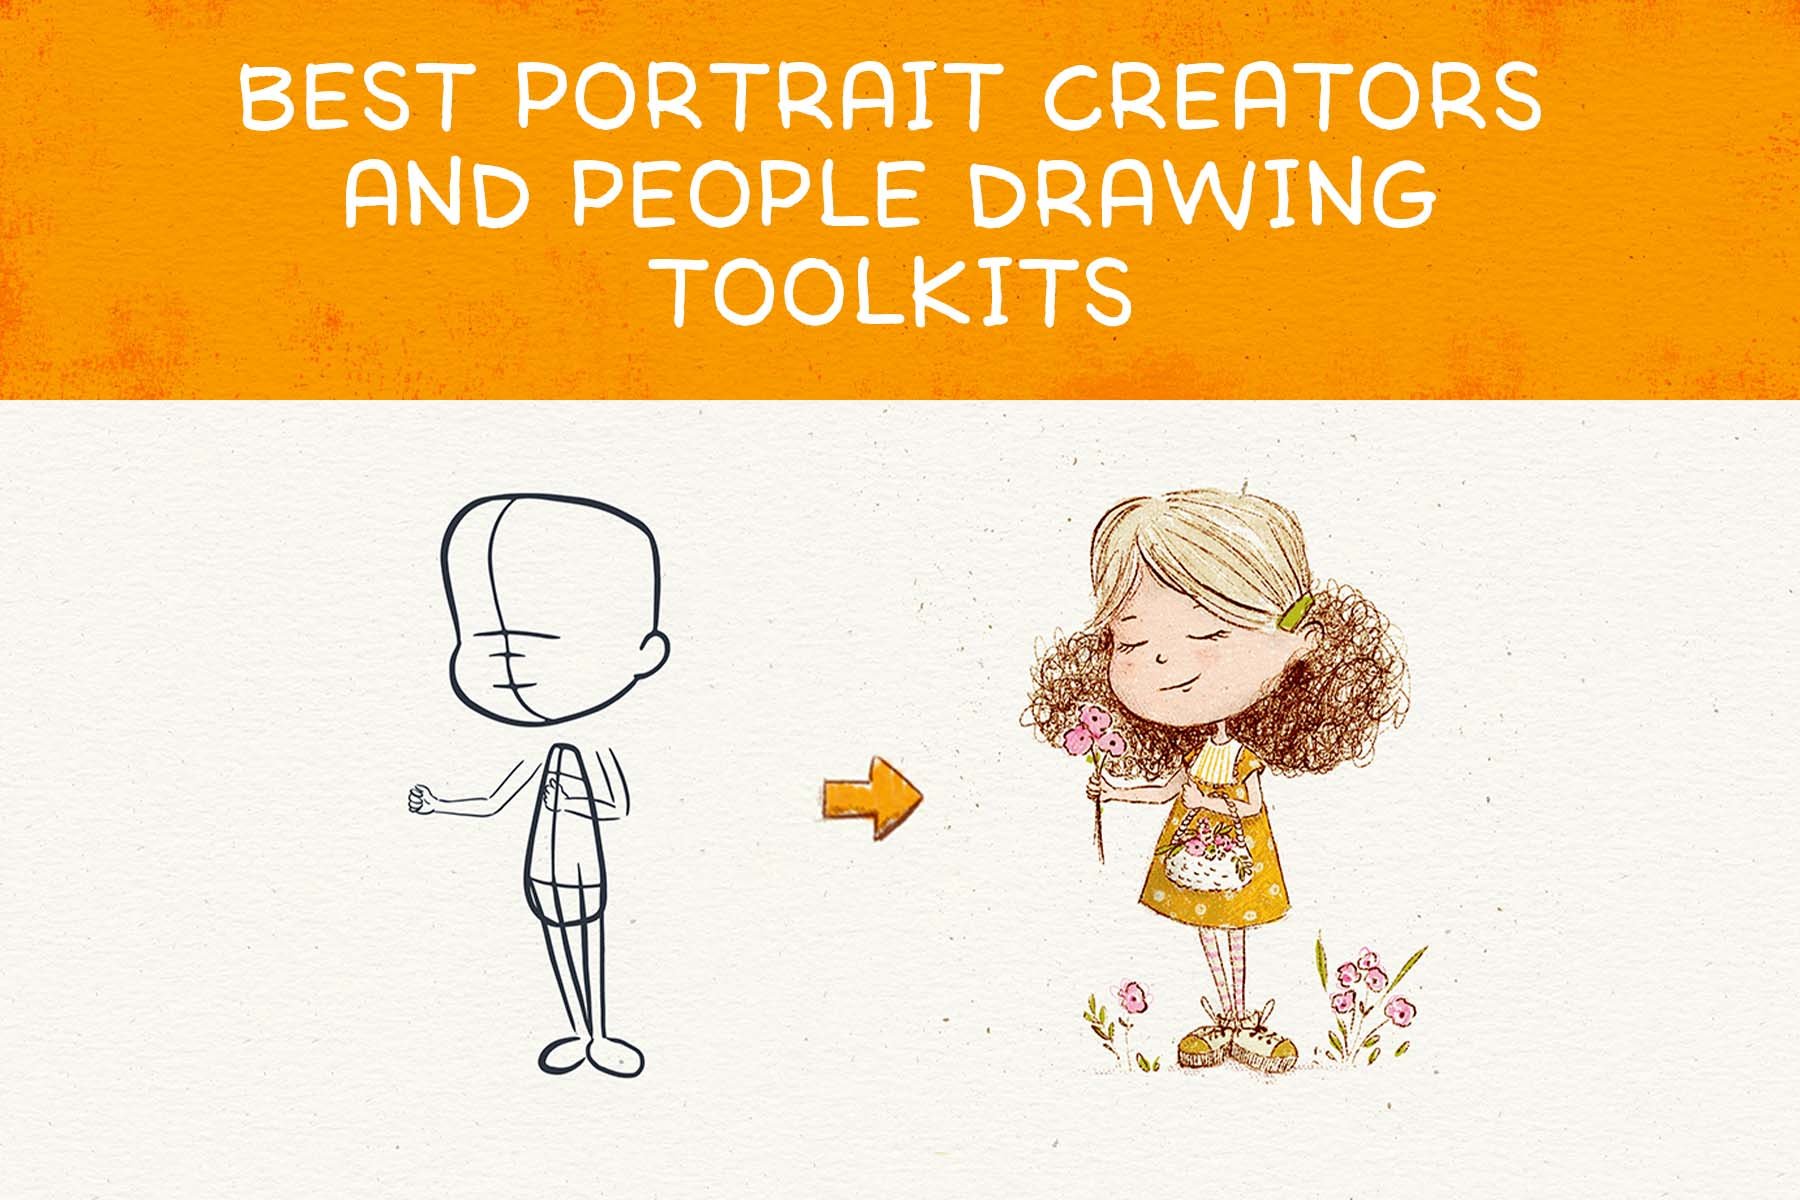 Best Portrait Creators and People Drawing Toolkits - Design Cuts